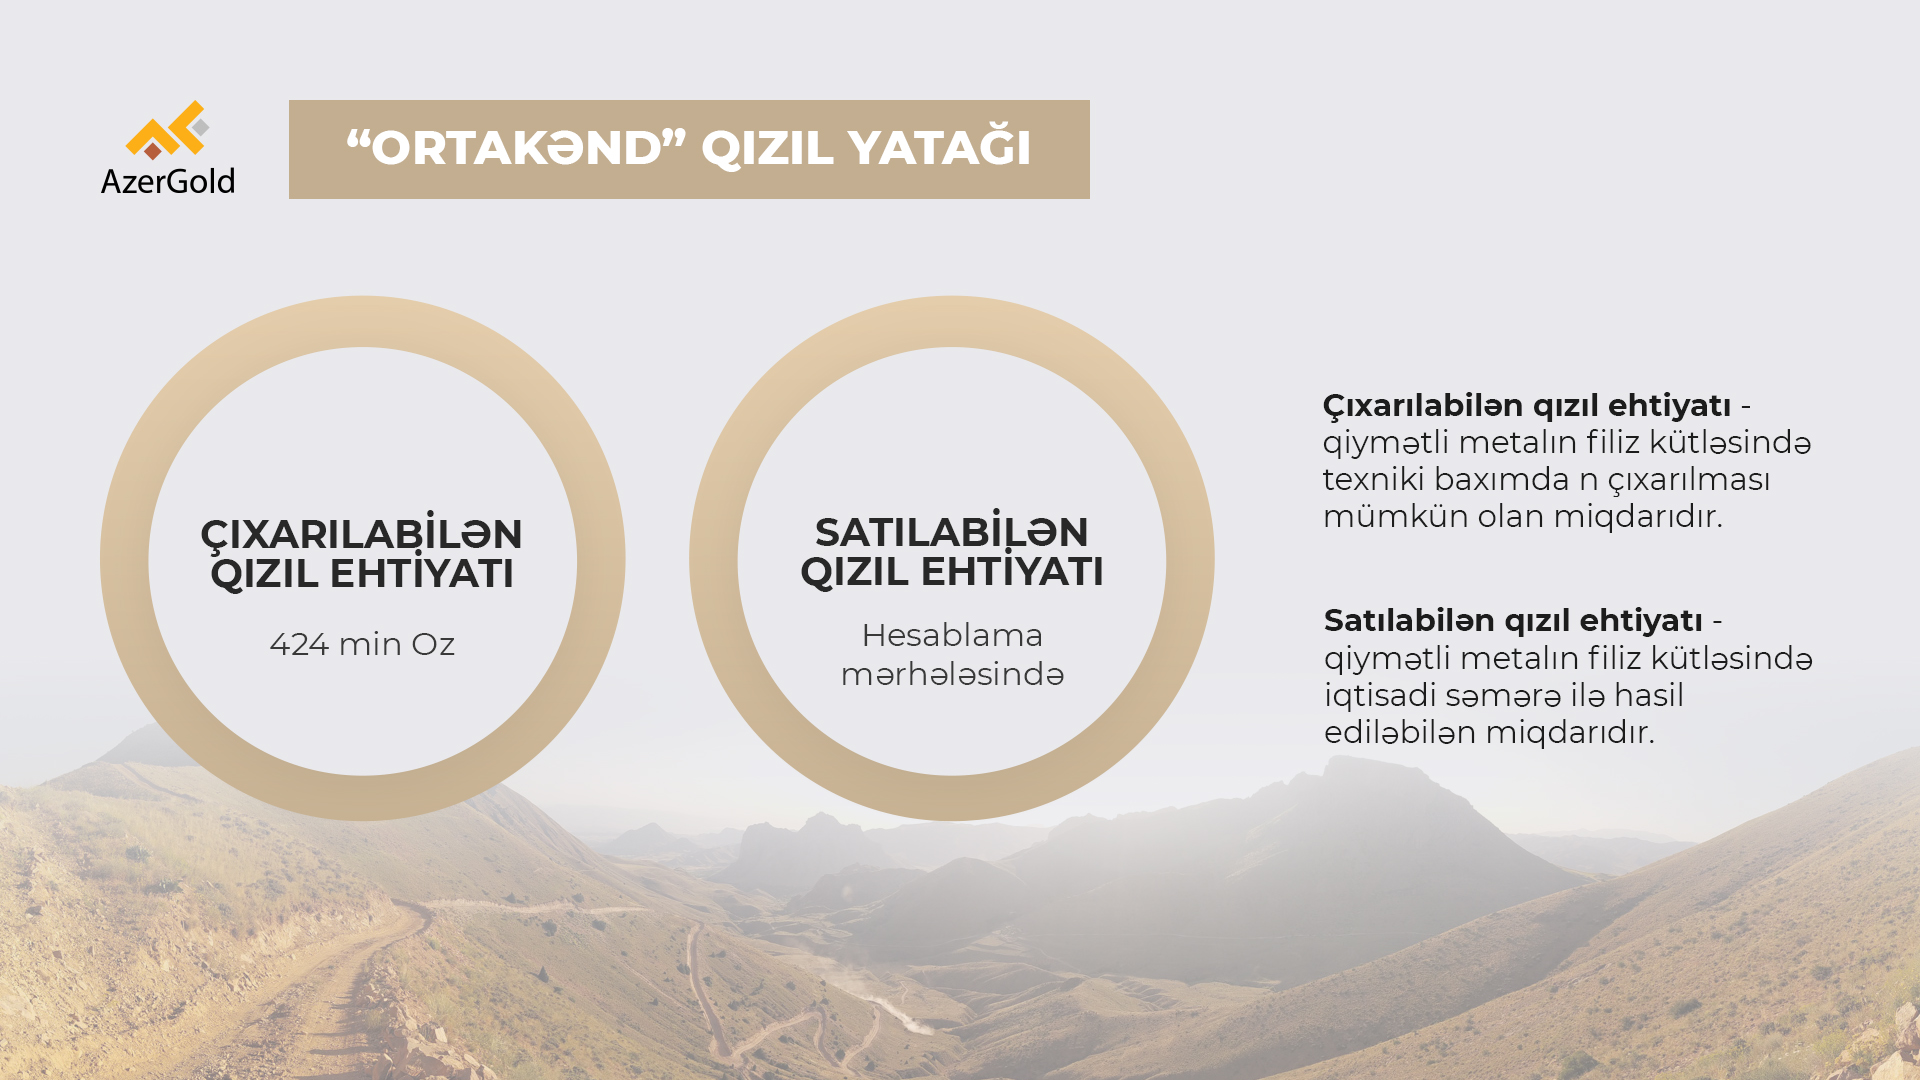 Positive Preliminary Results of Geological Exploration at the Ortakend Gold Deposit